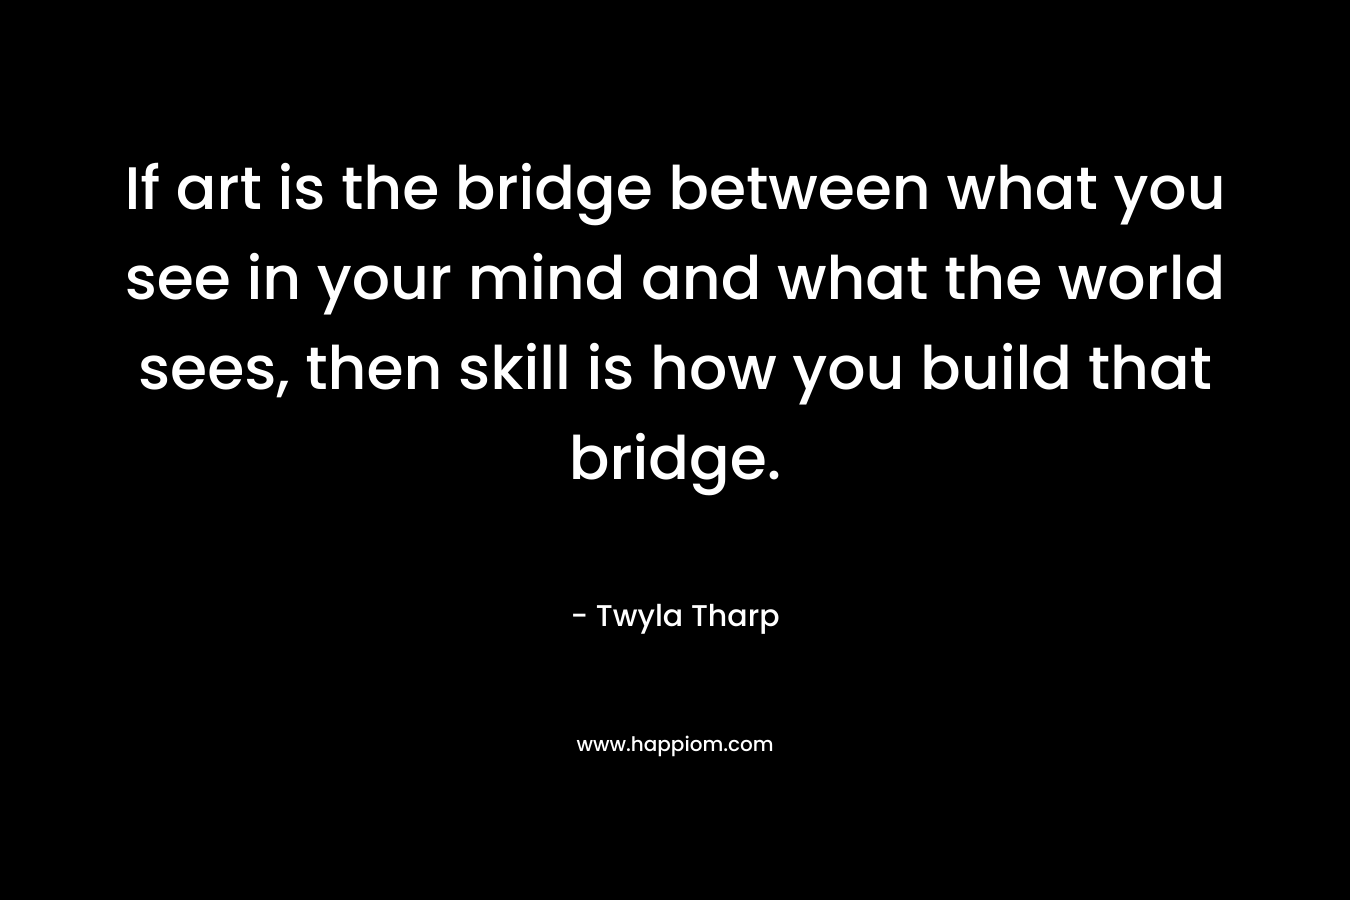 If art is the bridge between what you see in your mind and what the world sees, then skill is how you build that bridge.